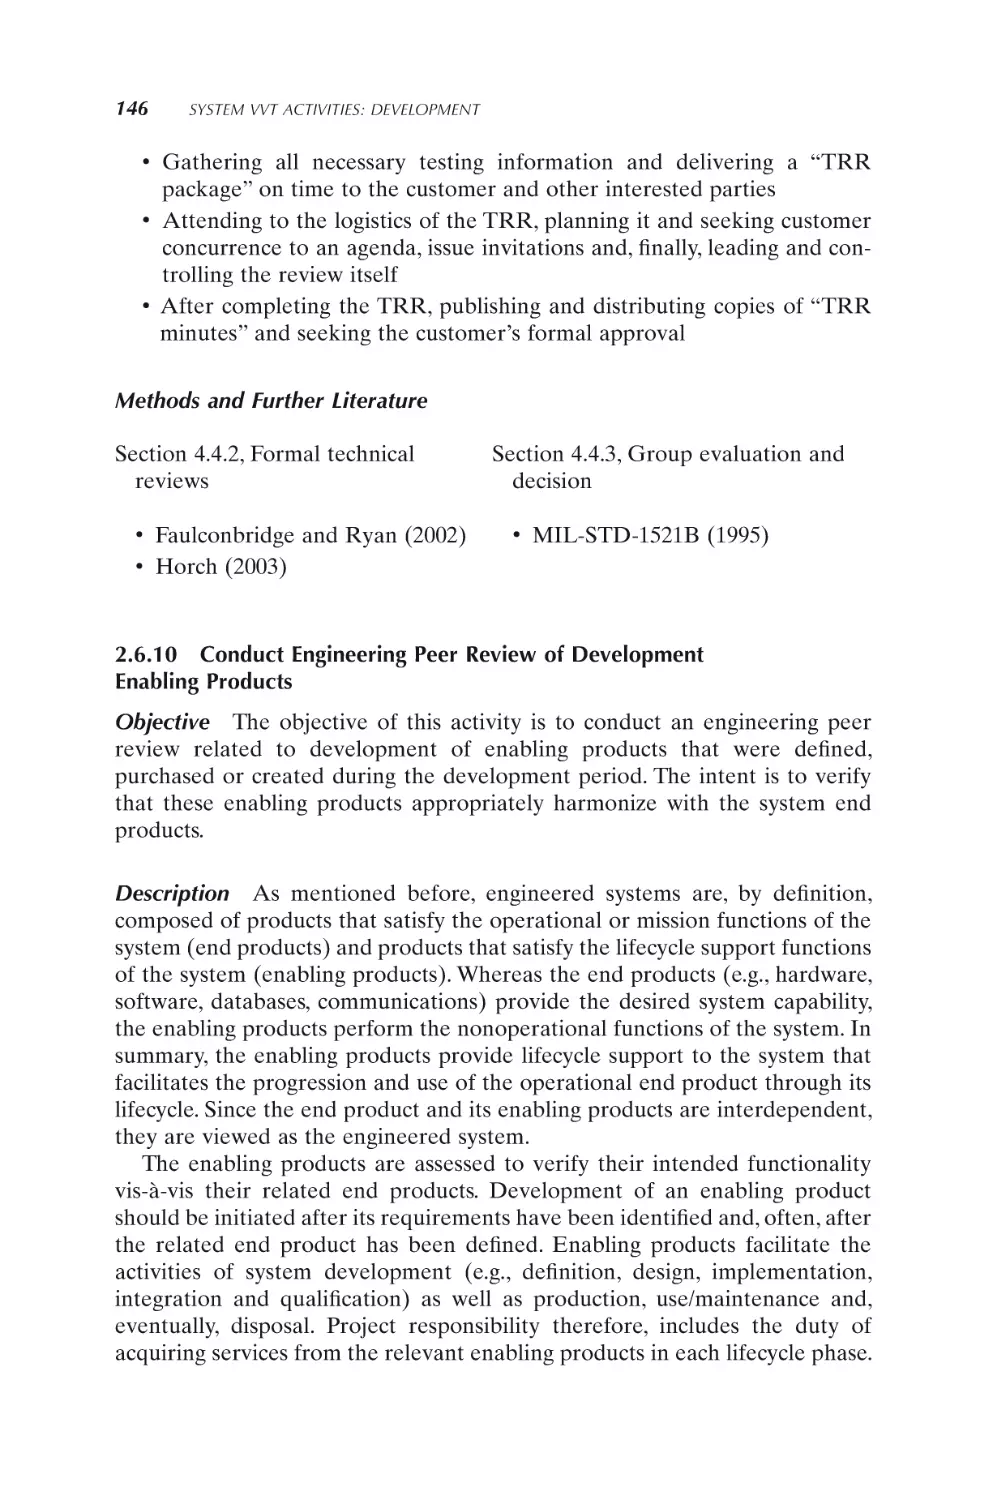 2.6.10 Conduct Engineering Peer Review of Development Enabling Products